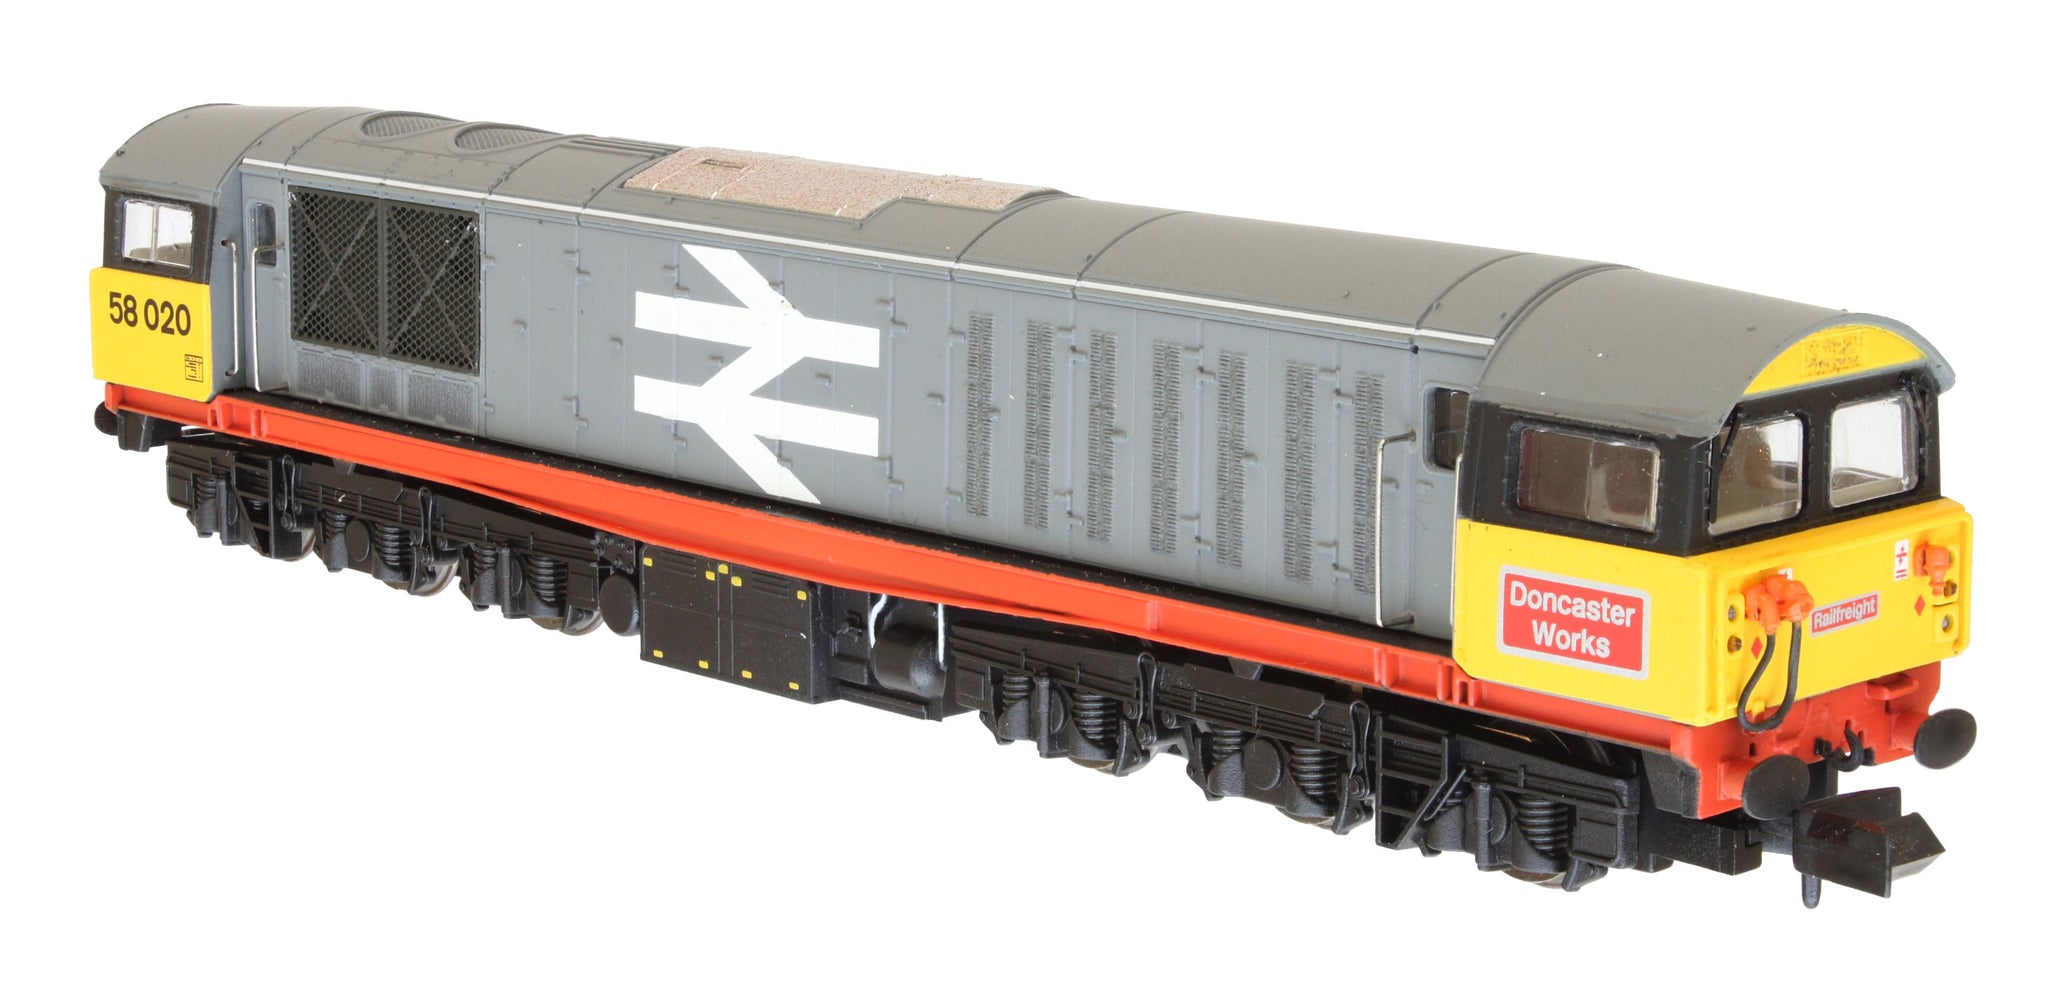 2D-058-002 N Gauge Class 58 Railfreight Revised Front Logo Red Stripe 58020